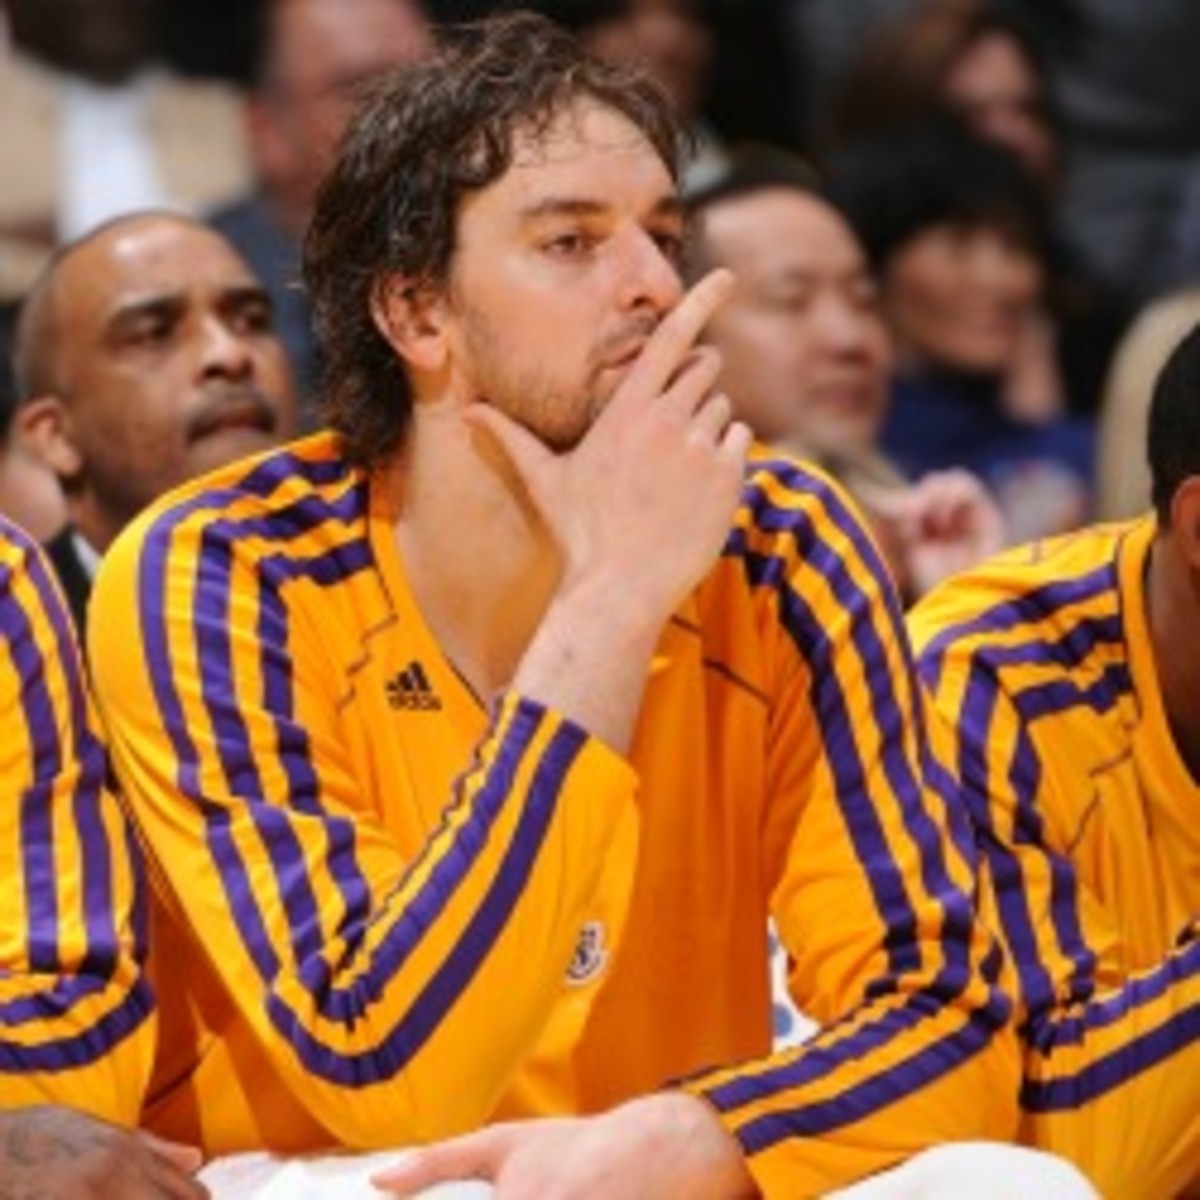 Lakers big man Pau Gasol is currently out with tendinitis in both knees. (Andrew D. Bernstein/Getty Images)